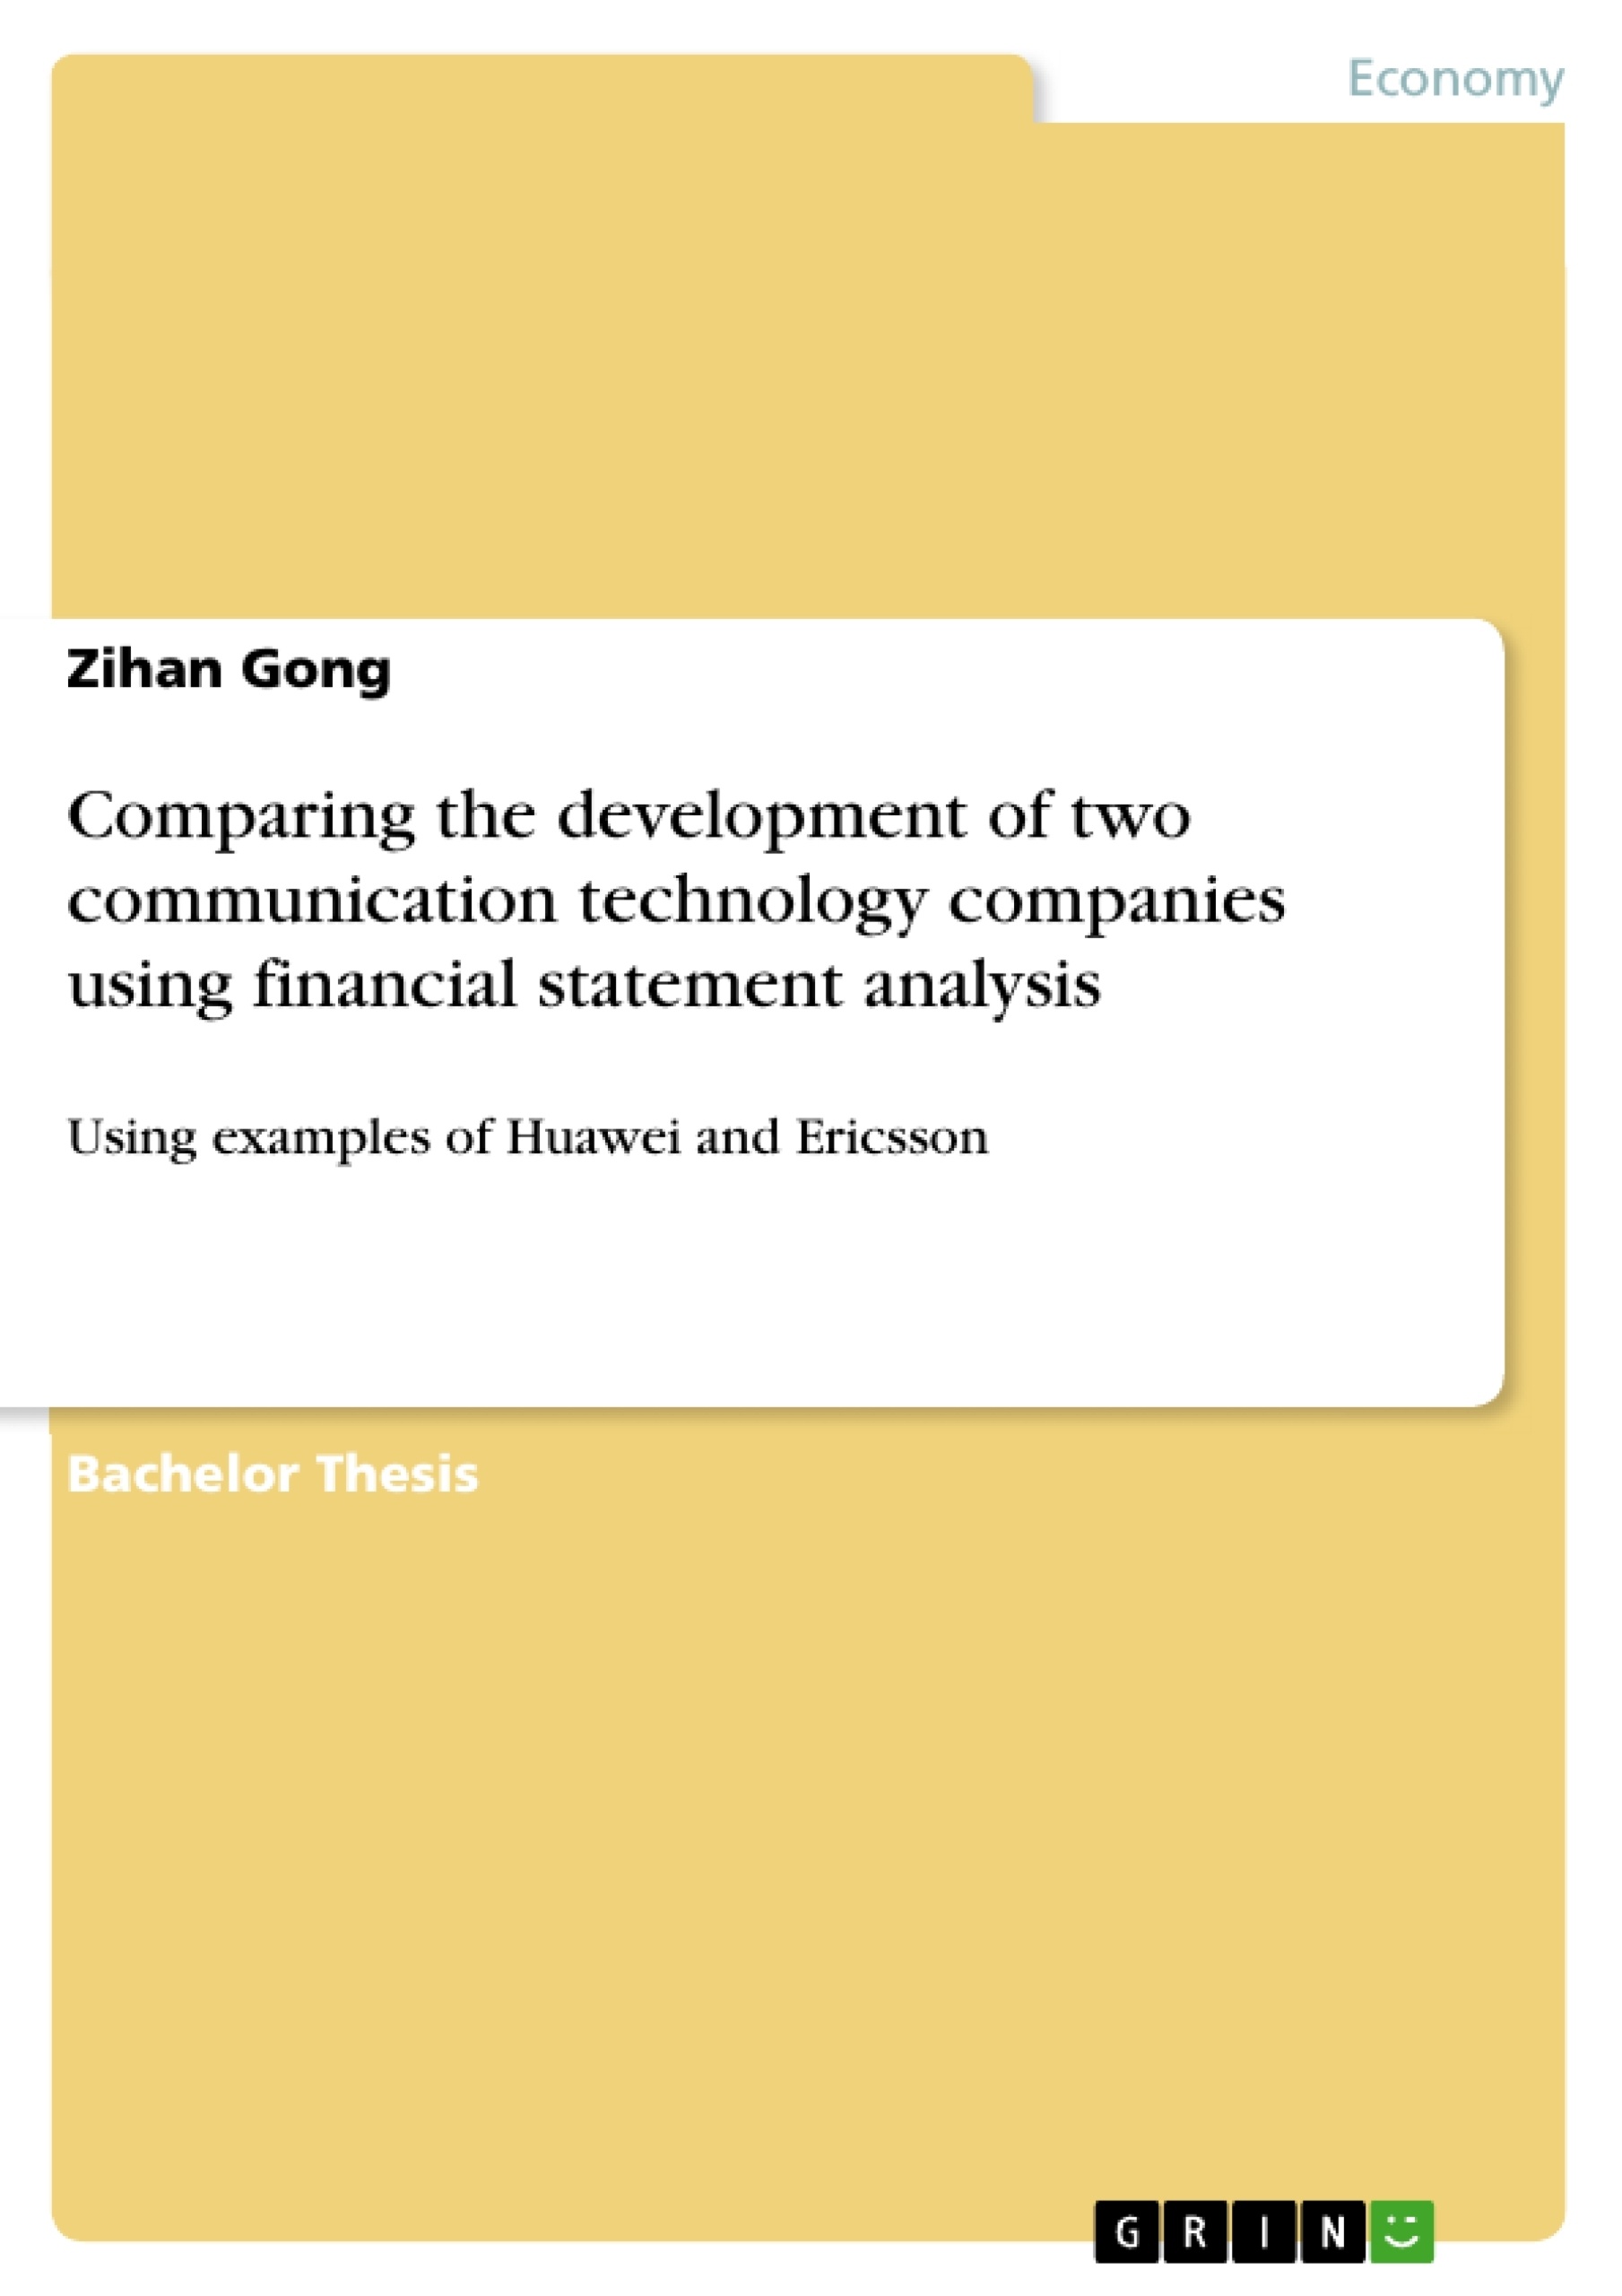 Título: Comparing the development of two communication technology companies using financial statement analysis